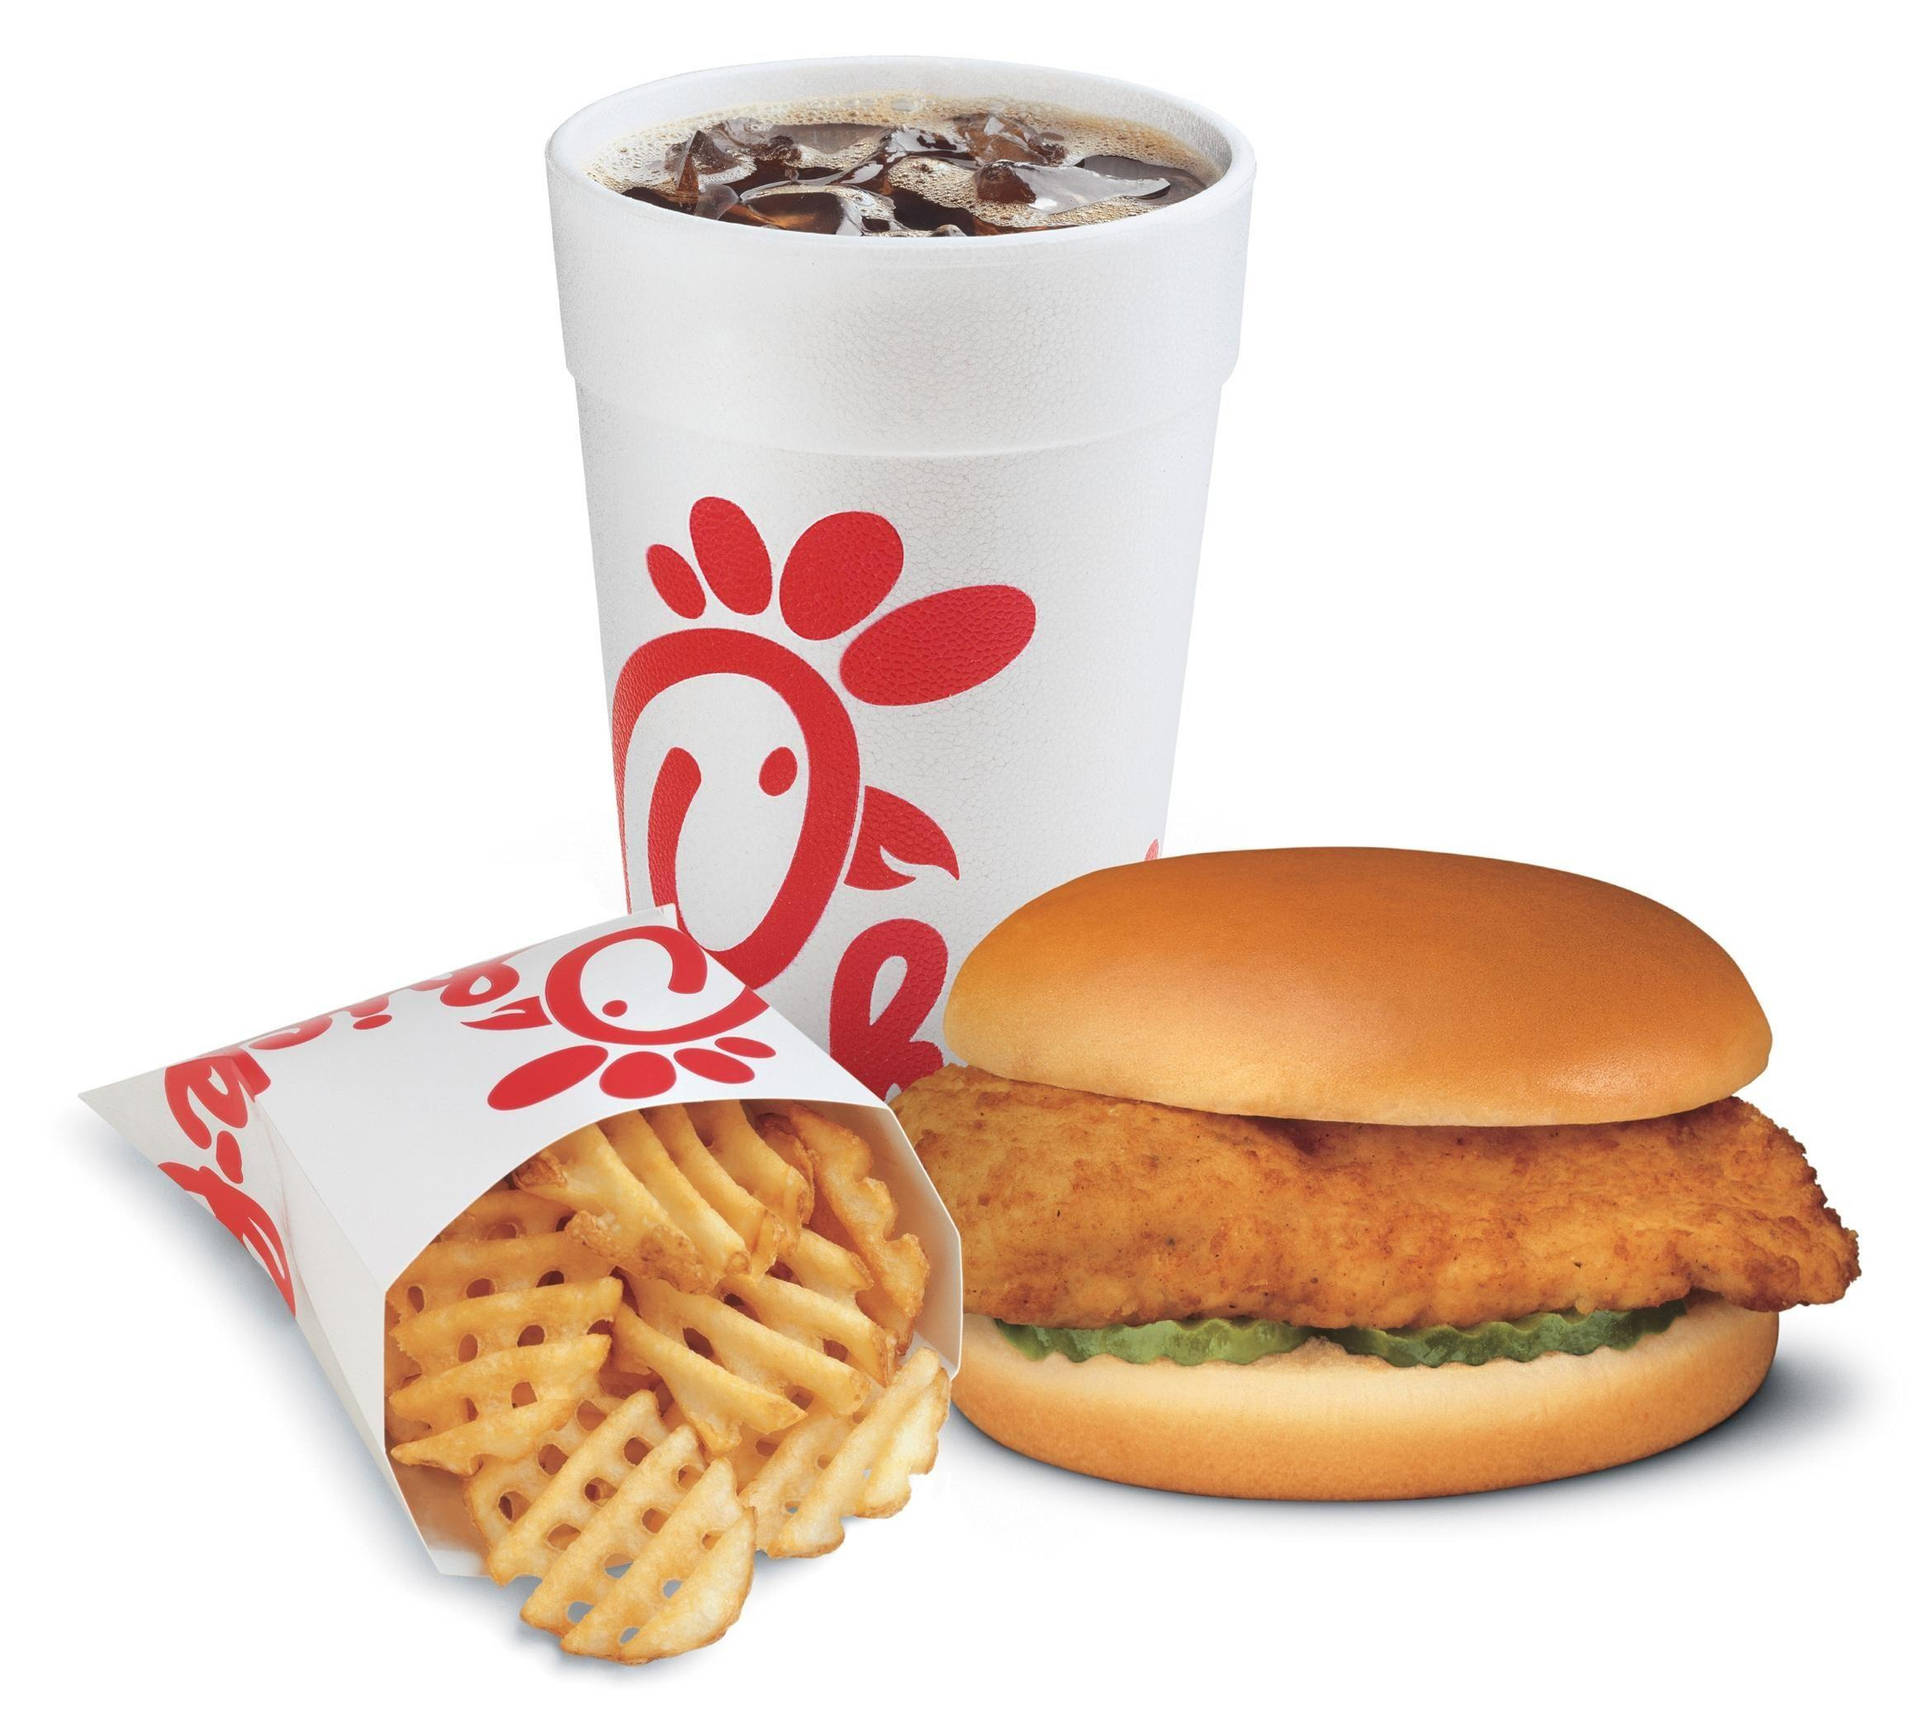 Chick Fil A Best Meal Picture